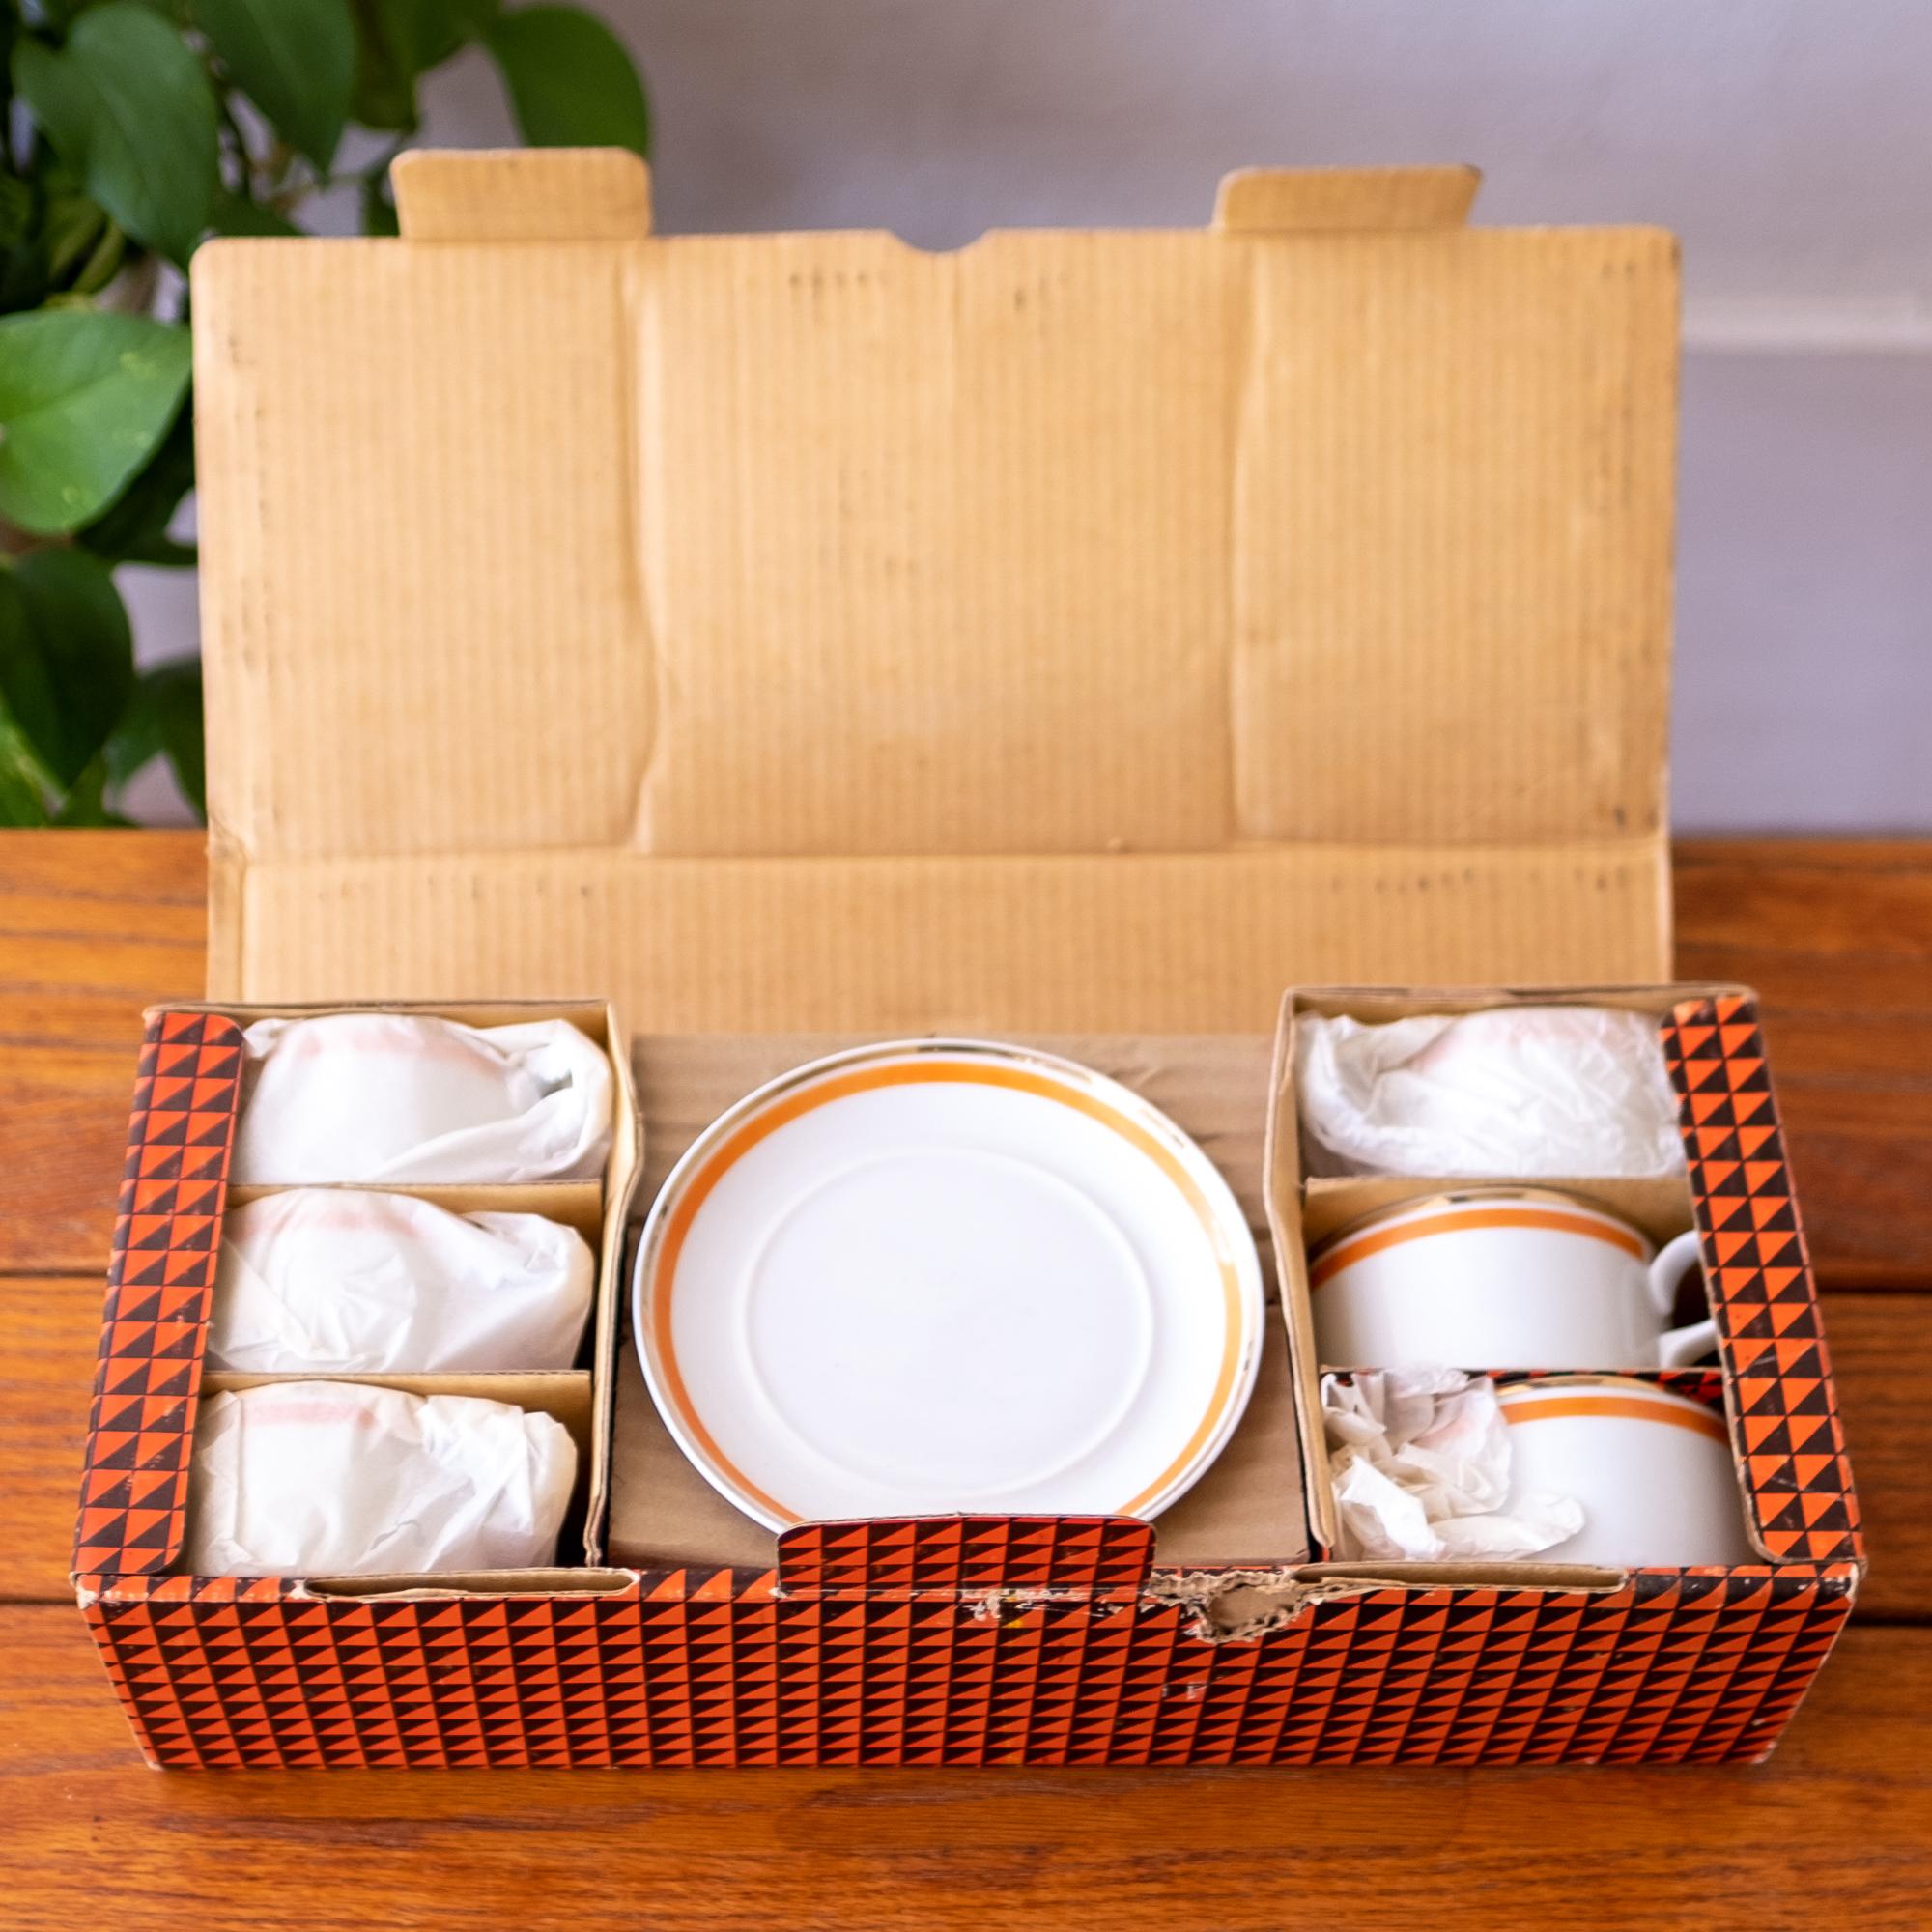 Set of six LaGardo Tackett coffee cups. They are unused in the original box. Tackett was a prolific mid-century artist and industrial designer. Signed on bottom. 1950s

Measures: Cups: 4.25